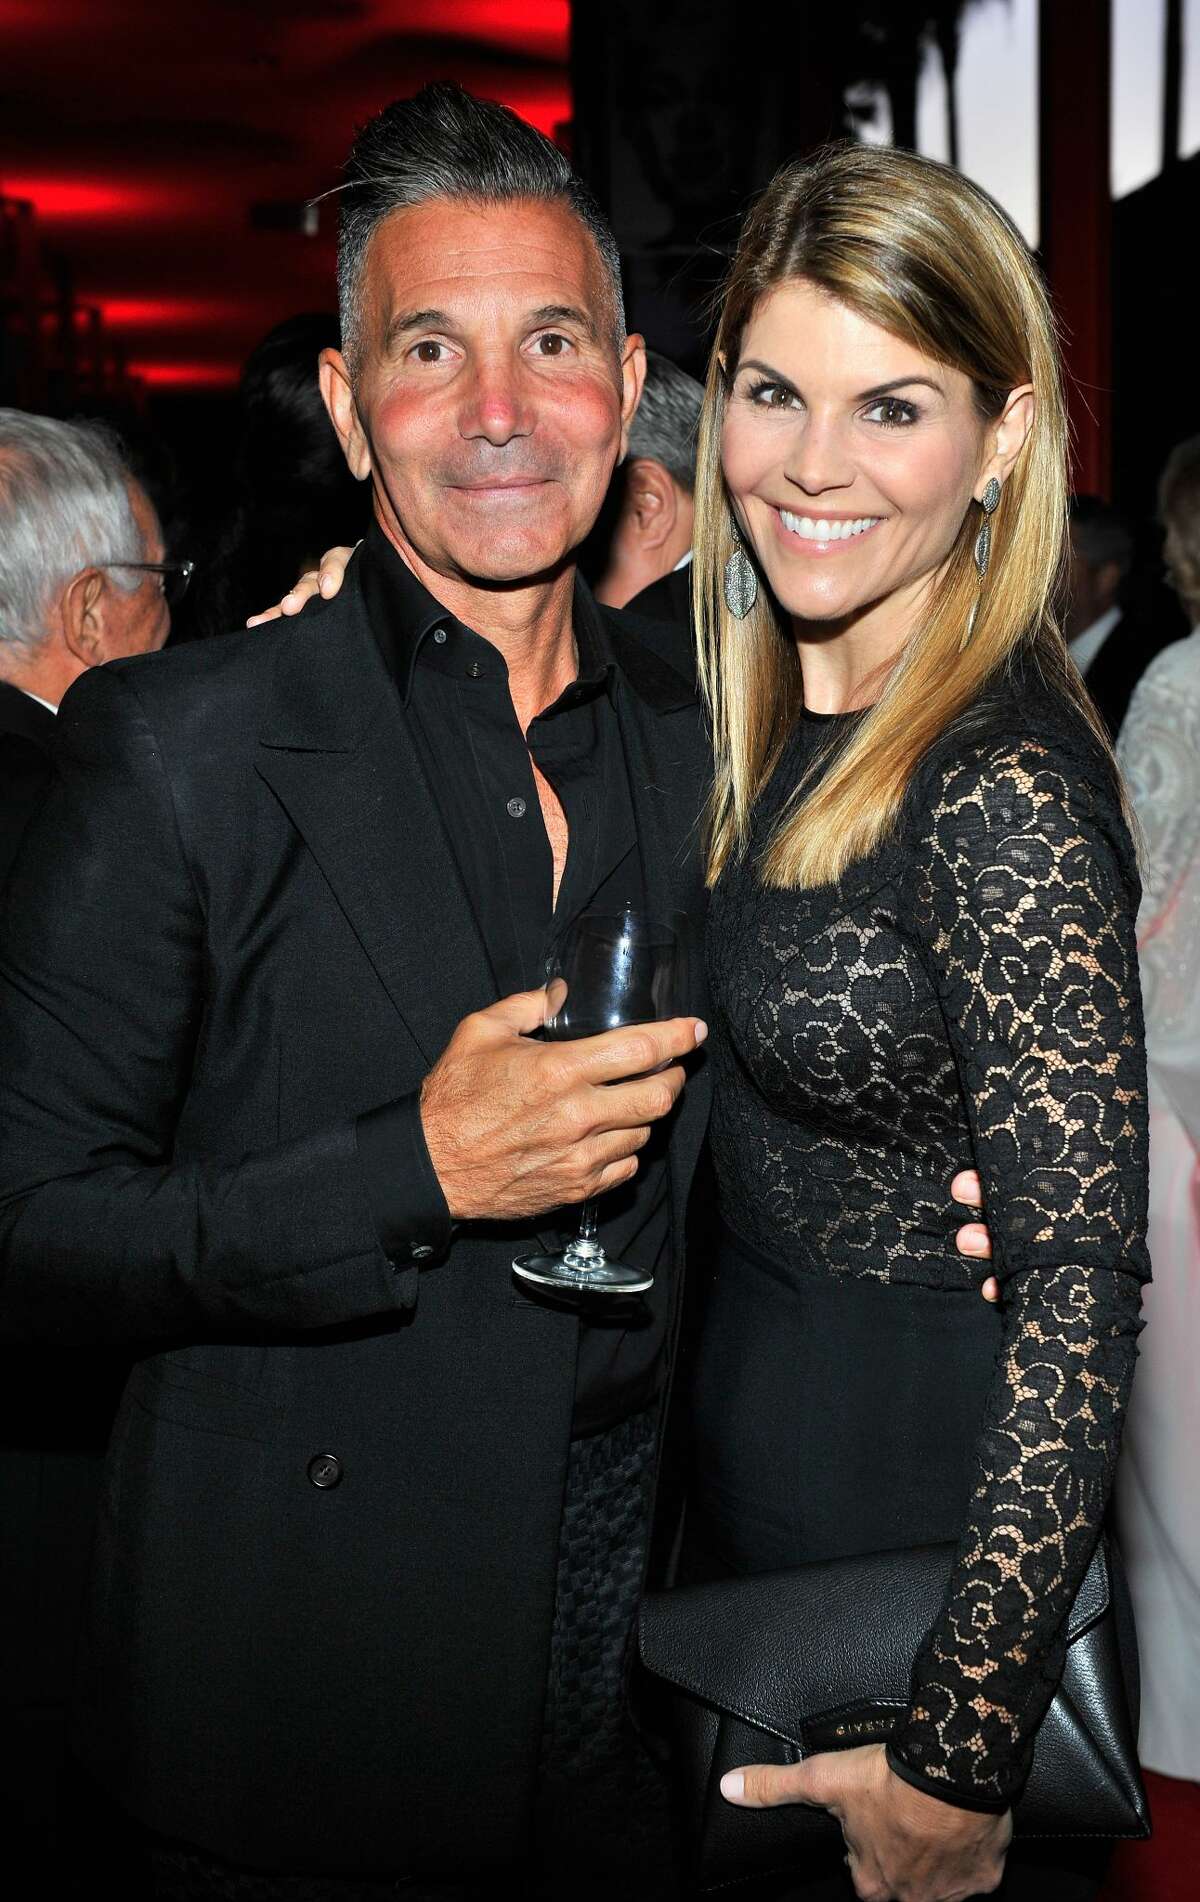 Designer Mossimo Giannulli and actress Lori Loughlin attend LACMA's 50th Anniversary Gala sponsored by Christie's at LACMA on April 18, 2015 in Los Angeles, California.